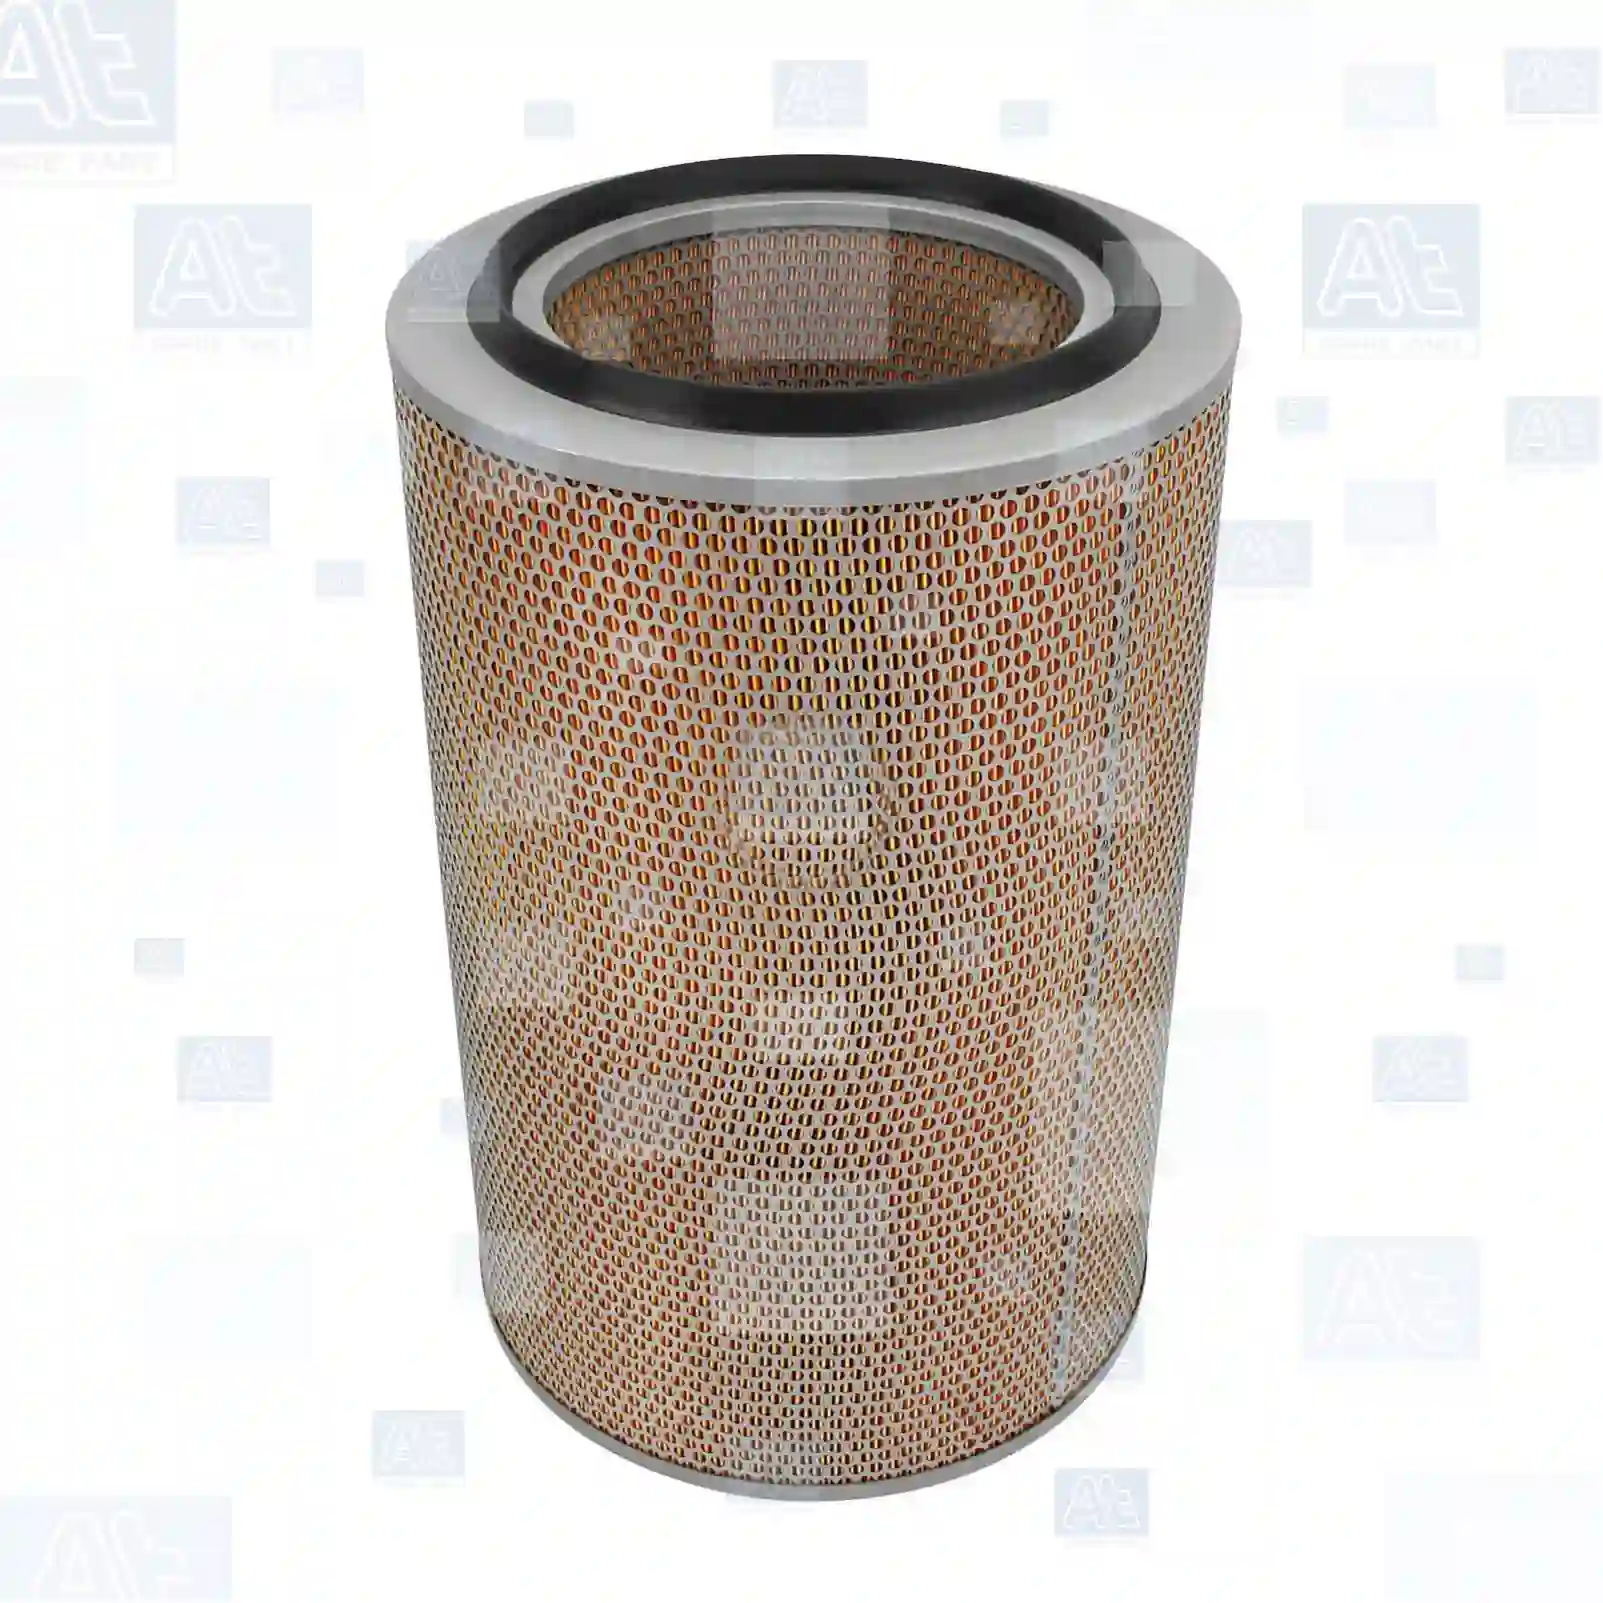 Air filter, at no 77706462, oem no: 00667686, 00667690, 0667686, 0667690, 06749675, 663856, 667685, 667686, 667690, 674967, 6749675, 685793, 6857930, 685794, 00104413, 03023987, 3I-0252, 3I-0794, 3I-0922, 3I-0966, 6N-6064, 30941504, 8690940020, 0000709050, 0000712420, 0694218, 1500137, 694218, ACU8223, 29504526, 43262700, 5040142, 988673, 98867300, 16053199, 606901670110, 0746389, 0746546, 0746928, 1470696, 01902129, 08323385, 08323386, 08323387, Y03732104, Y05772407, DNP771558, 25096141, 4003986, 4012361, 6486941, 9009545, 9035429, 9038899, 9059563, 359828, 178012020, 178012290, 108218843, 00197588, 01902129, 01904550, 02808626, 02996154, 03563021, 08322986, 08322987, 1902129, 1904550, 2808626, 2996154, 41272534, 42488361, 5000806317, 5000806377, 8322986, 8322987, AT69308, 721110956010, 42488361, LA1159, LA1166, 5106191, 510619108, 510619114, 5604682, 04585054114, 04585055114, 04588092304, 81083040038, 81083040043, 81083040044, 81083040091, 81084016213, 81084016219, 82083040038, 0000941504, 0030945004, 0040945004, 0090940502, 8319095116, 8690940020, 606901670110, 606901970110, 020317000, 80748274, 197588, 850568, E0850568, E850568, F0850568, F850568, R1050, 275588, 8319095116, 83190951160, 99014190033, 81083040091, 16546CW46P, 621204740, 631202910, 3338070, CH12278, 11033128, 110331287, ZG00826-0008 At Spare Part | Engine, Accelerator Pedal, Camshaft, Connecting Rod, Crankcase, Crankshaft, Cylinder Head, Engine Suspension Mountings, Exhaust Manifold, Exhaust Gas Recirculation, Filter Kits, Flywheel Housing, General Overhaul Kits, Engine, Intake Manifold, Oil Cleaner, Oil Cooler, Oil Filter, Oil Pump, Oil Sump, Piston & Liner, Sensor & Switch, Timing Case, Turbocharger, Cooling System, Belt Tensioner, Coolant Filter, Coolant Pipe, Corrosion Prevention Agent, Drive, Expansion Tank, Fan, Intercooler, Monitors & Gauges, Radiator, Thermostat, V-Belt / Timing belt, Water Pump, Fuel System, Electronical Injector Unit, Feed Pump, Fuel Filter, cpl., Fuel Gauge Sender,  Fuel Line, Fuel Pump, Fuel Tank, Injection Line Kit, Injection Pump, Exhaust System, Clutch & Pedal, Gearbox, Propeller Shaft, Axles, Brake System, Hubs & Wheels, Suspension, Leaf Spring, Universal Parts / Accessories, Steering, Electrical System, Cabin Air filter, at no 77706462, oem no: 00667686, 00667690, 0667686, 0667690, 06749675, 663856, 667685, 667686, 667690, 674967, 6749675, 685793, 6857930, 685794, 00104413, 03023987, 3I-0252, 3I-0794, 3I-0922, 3I-0966, 6N-6064, 30941504, 8690940020, 0000709050, 0000712420, 0694218, 1500137, 694218, ACU8223, 29504526, 43262700, 5040142, 988673, 98867300, 16053199, 606901670110, 0746389, 0746546, 0746928, 1470696, 01902129, 08323385, 08323386, 08323387, Y03732104, Y05772407, DNP771558, 25096141, 4003986, 4012361, 6486941, 9009545, 9035429, 9038899, 9059563, 359828, 178012020, 178012290, 108218843, 00197588, 01902129, 01904550, 02808626, 02996154, 03563021, 08322986, 08322987, 1902129, 1904550, 2808626, 2996154, 41272534, 42488361, 5000806317, 5000806377, 8322986, 8322987, AT69308, 721110956010, 42488361, LA1159, LA1166, 5106191, 510619108, 510619114, 5604682, 04585054114, 04585055114, 04588092304, 81083040038, 81083040043, 81083040044, 81083040091, 81084016213, 81084016219, 82083040038, 0000941504, 0030945004, 0040945004, 0090940502, 8319095116, 8690940020, 606901670110, 606901970110, 020317000, 80748274, 197588, 850568, E0850568, E850568, F0850568, F850568, R1050, 275588, 8319095116, 83190951160, 99014190033, 81083040091, 16546CW46P, 621204740, 631202910, 3338070, CH12278, 11033128, 110331287, ZG00826-0008 At Spare Part | Engine, Accelerator Pedal, Camshaft, Connecting Rod, Crankcase, Crankshaft, Cylinder Head, Engine Suspension Mountings, Exhaust Manifold, Exhaust Gas Recirculation, Filter Kits, Flywheel Housing, General Overhaul Kits, Engine, Intake Manifold, Oil Cleaner, Oil Cooler, Oil Filter, Oil Pump, Oil Sump, Piston & Liner, Sensor & Switch, Timing Case, Turbocharger, Cooling System, Belt Tensioner, Coolant Filter, Coolant Pipe, Corrosion Prevention Agent, Drive, Expansion Tank, Fan, Intercooler, Monitors & Gauges, Radiator, Thermostat, V-Belt / Timing belt, Water Pump, Fuel System, Electronical Injector Unit, Feed Pump, Fuel Filter, cpl., Fuel Gauge Sender,  Fuel Line, Fuel Pump, Fuel Tank, Injection Line Kit, Injection Pump, Exhaust System, Clutch & Pedal, Gearbox, Propeller Shaft, Axles, Brake System, Hubs & Wheels, Suspension, Leaf Spring, Universal Parts / Accessories, Steering, Electrical System, Cabin